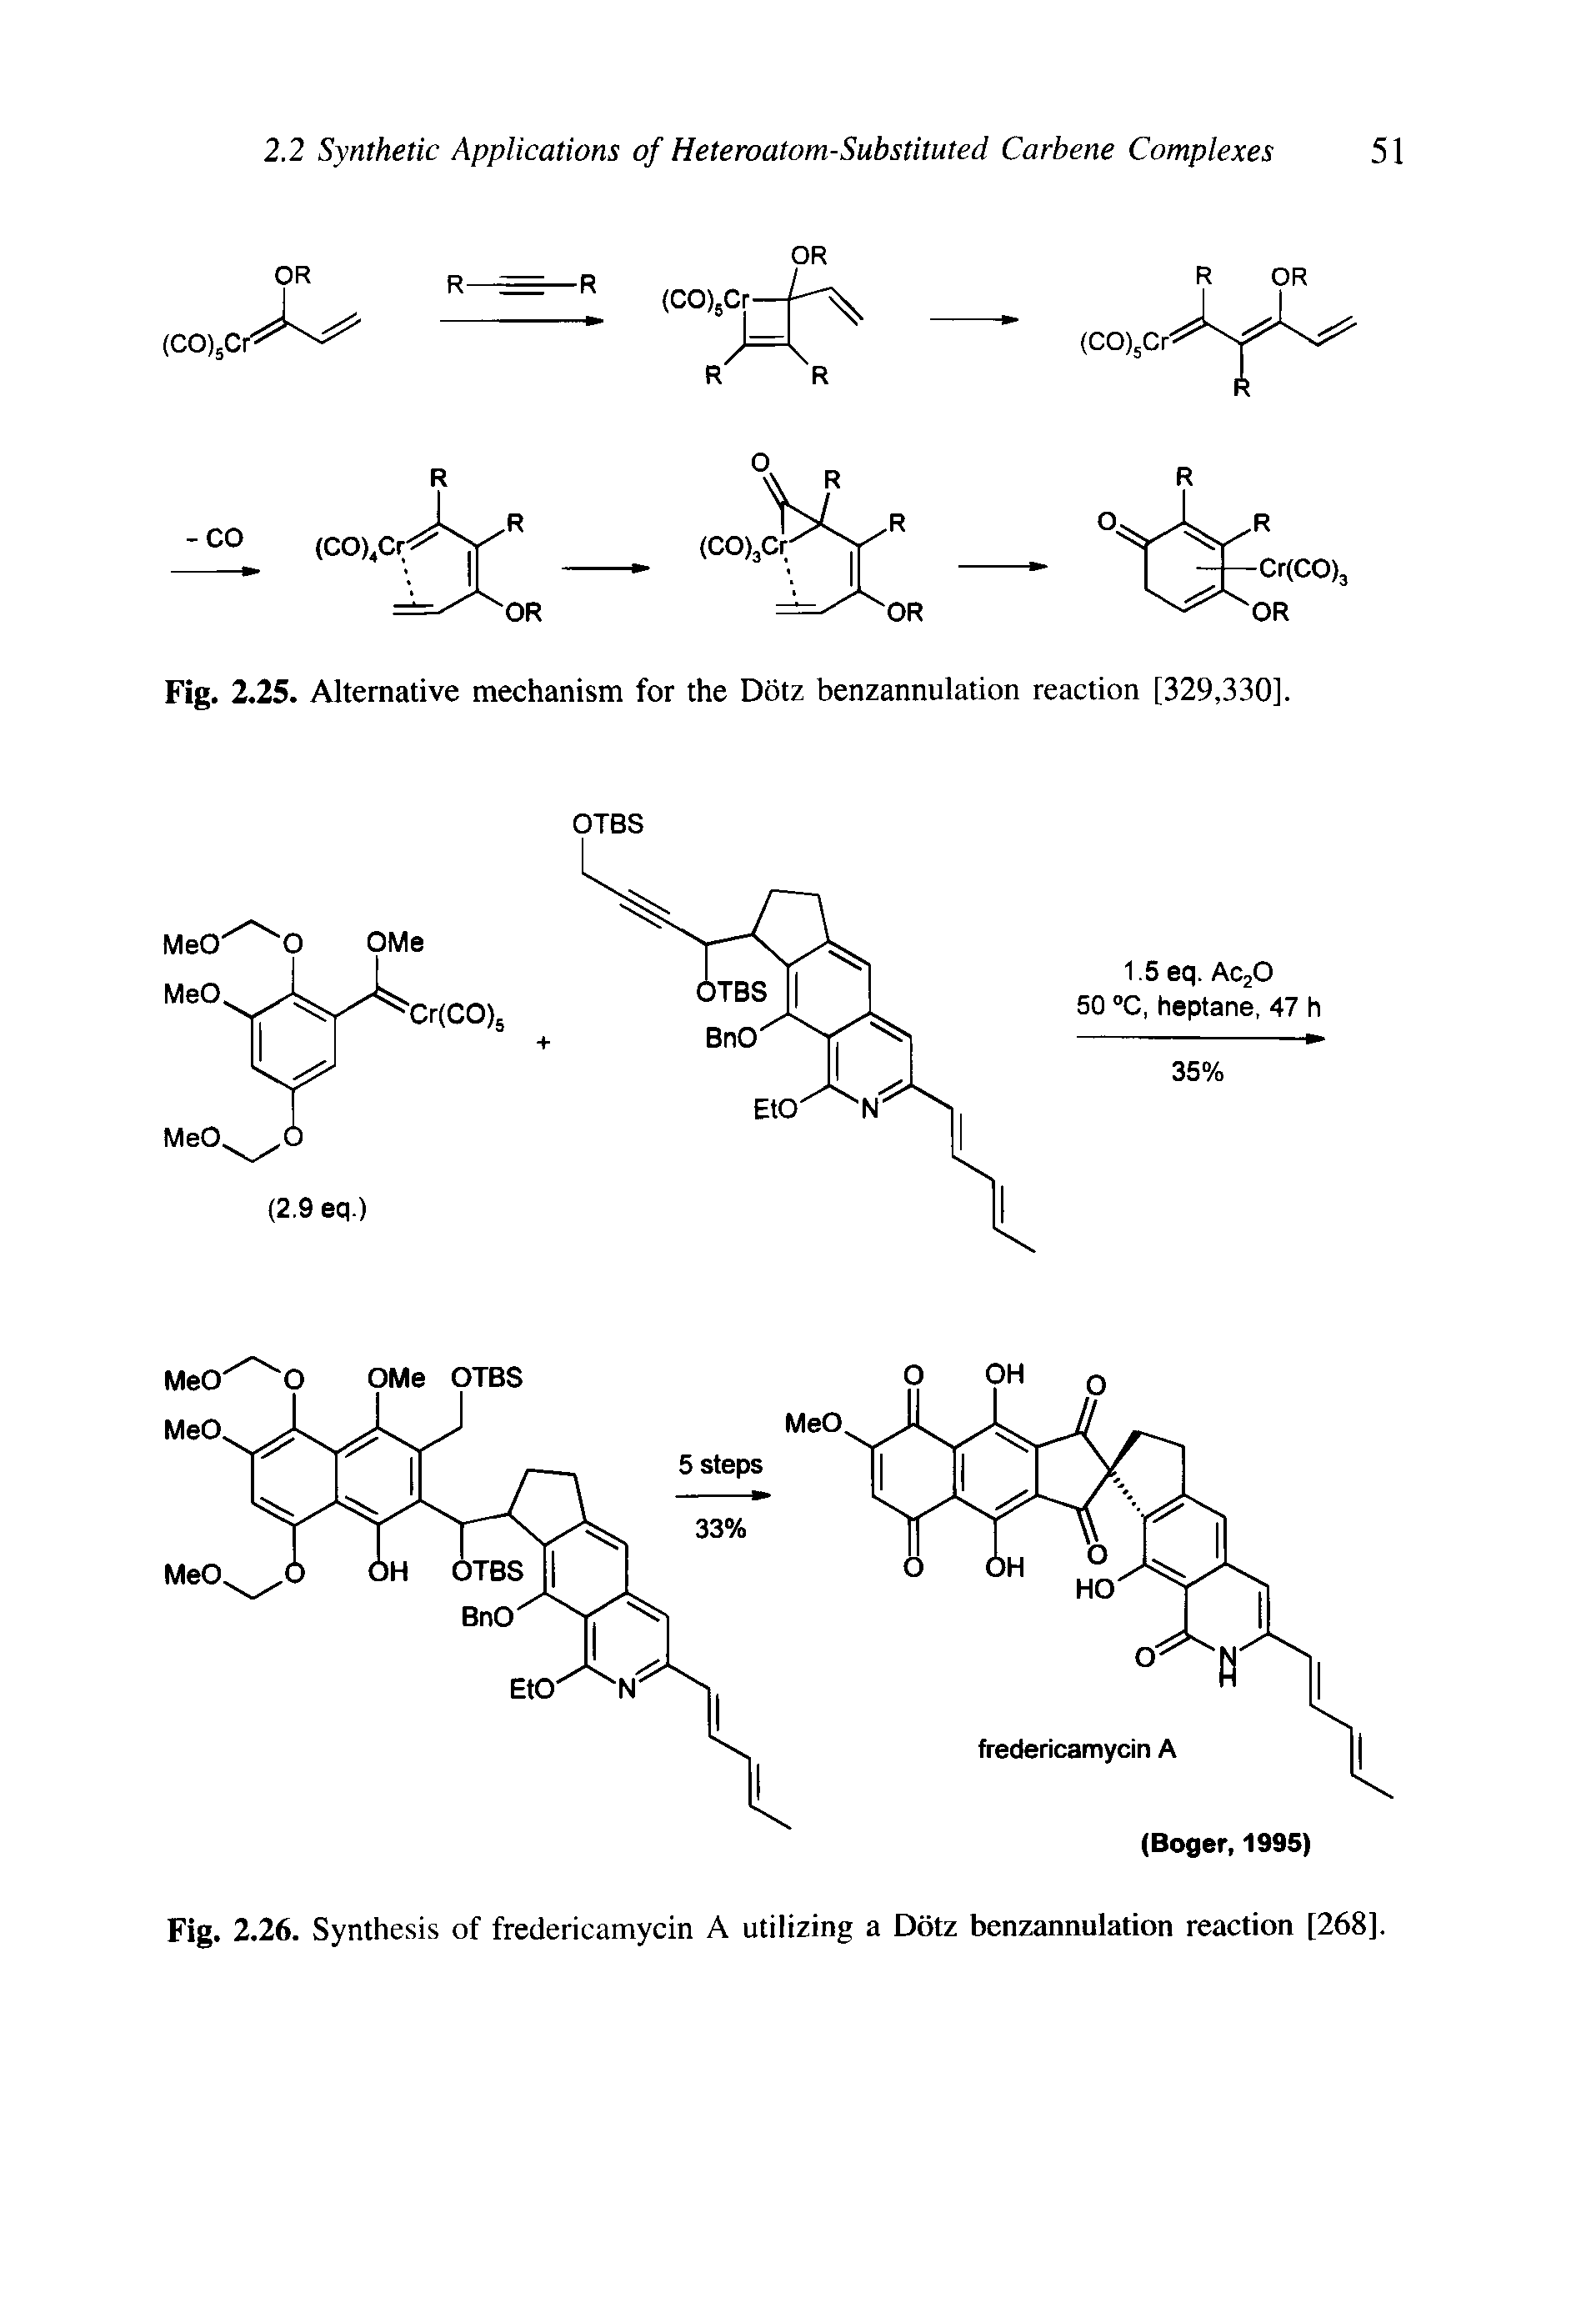 Fig. 2.26. Synthesis of fredericamycin A utilizing a Dotz benzannulation reaction [268].